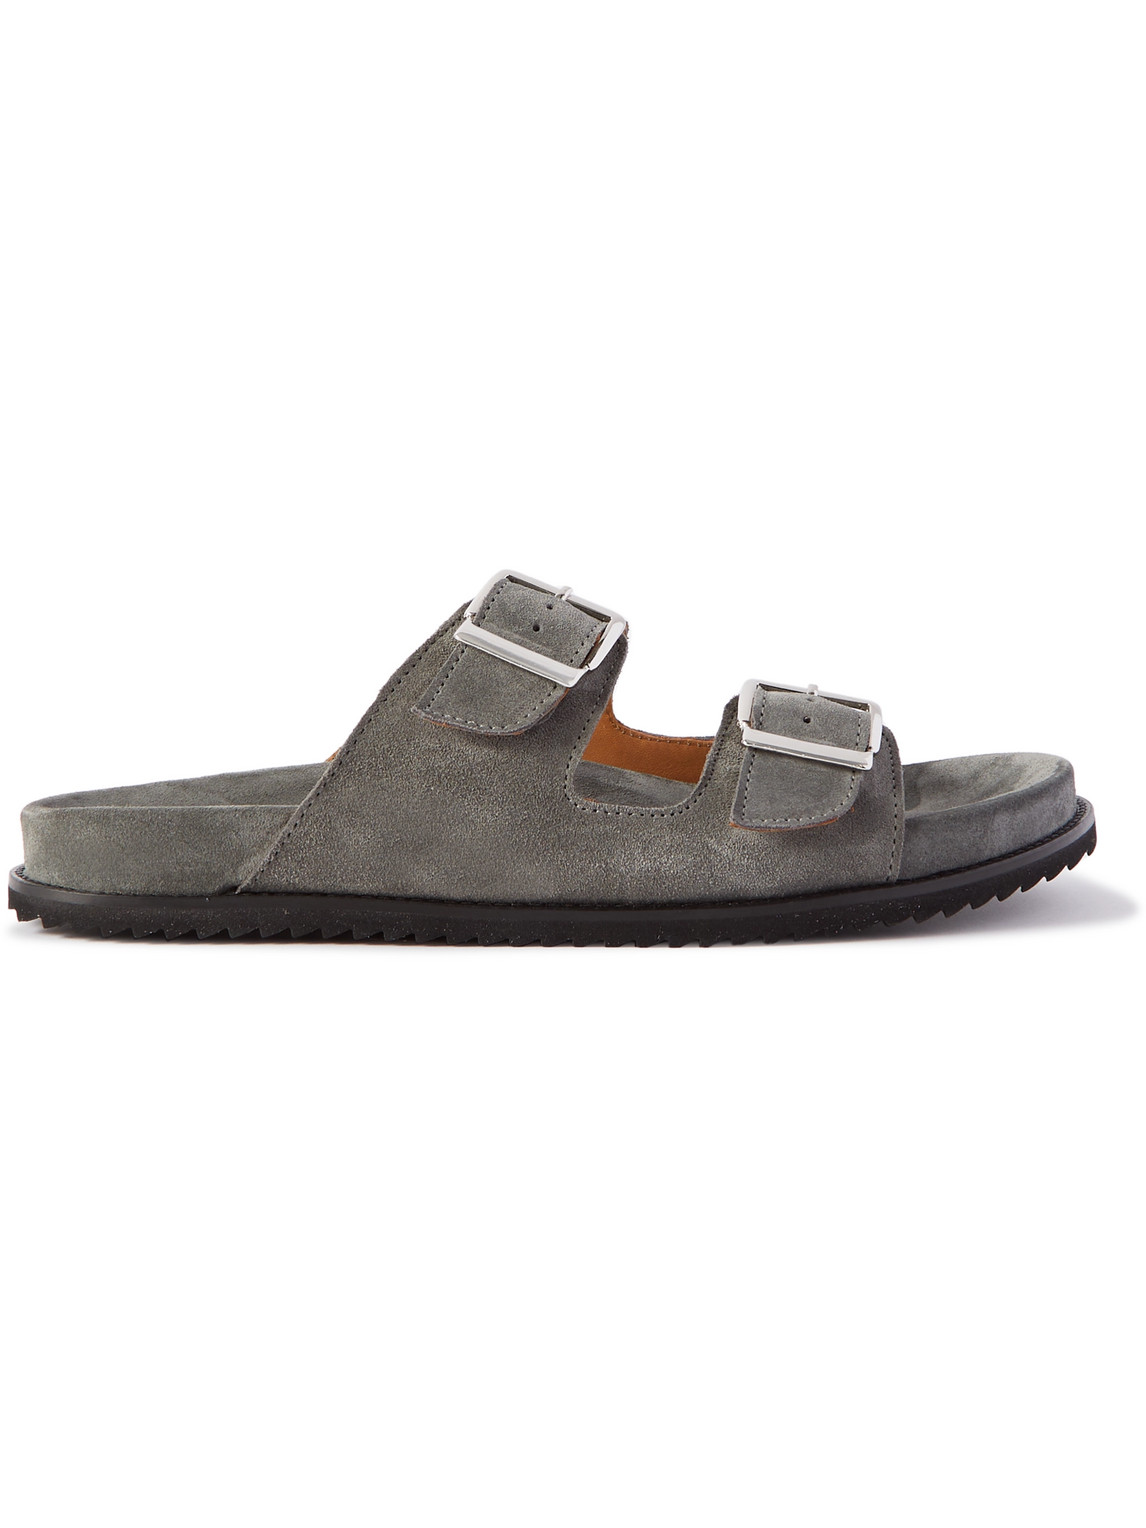 Mr P David Buckled Regenerated Suede By Evolo® Sandals In Gray